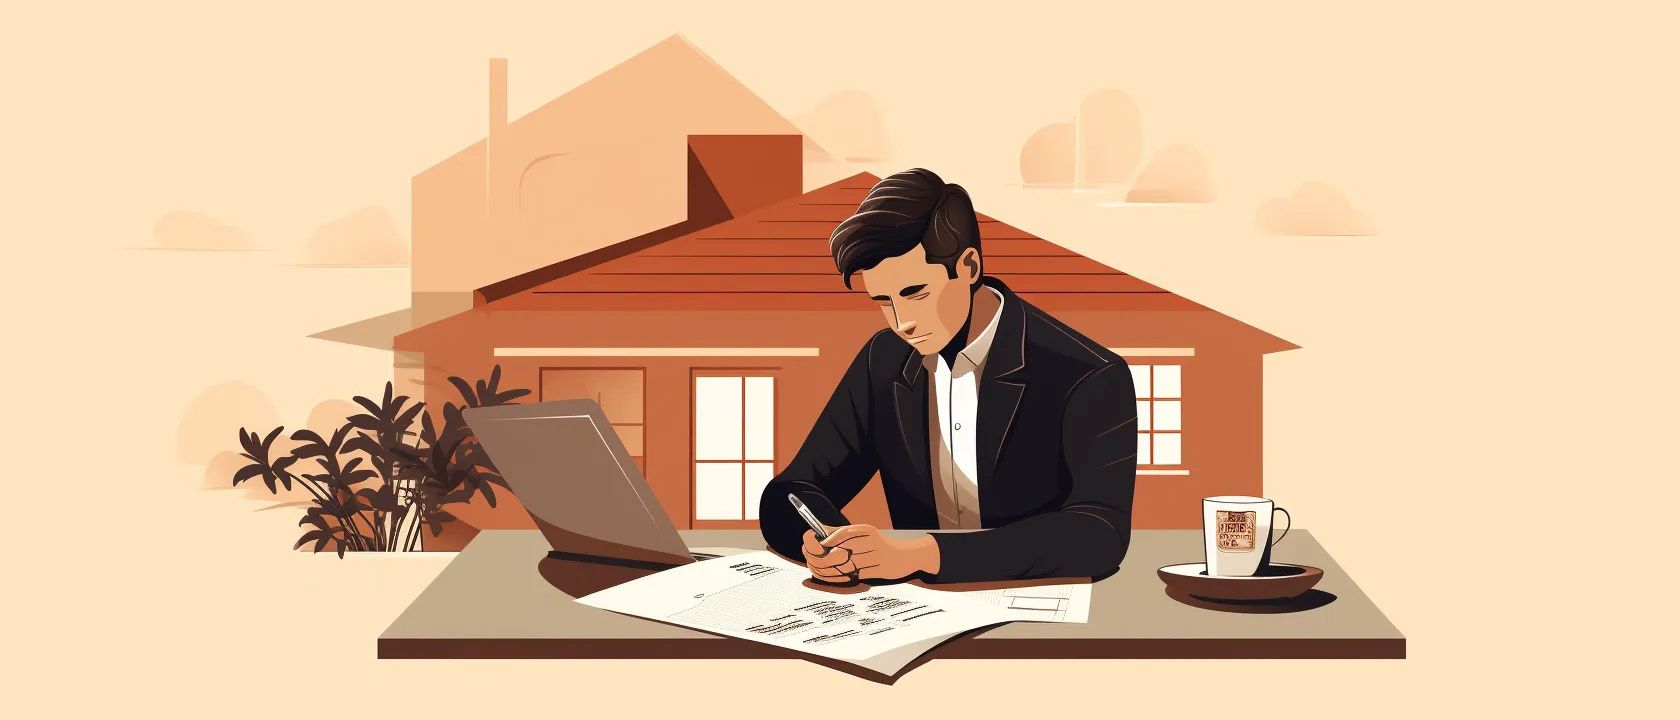 Man writing at a desk daydreaming of a house on his work desk